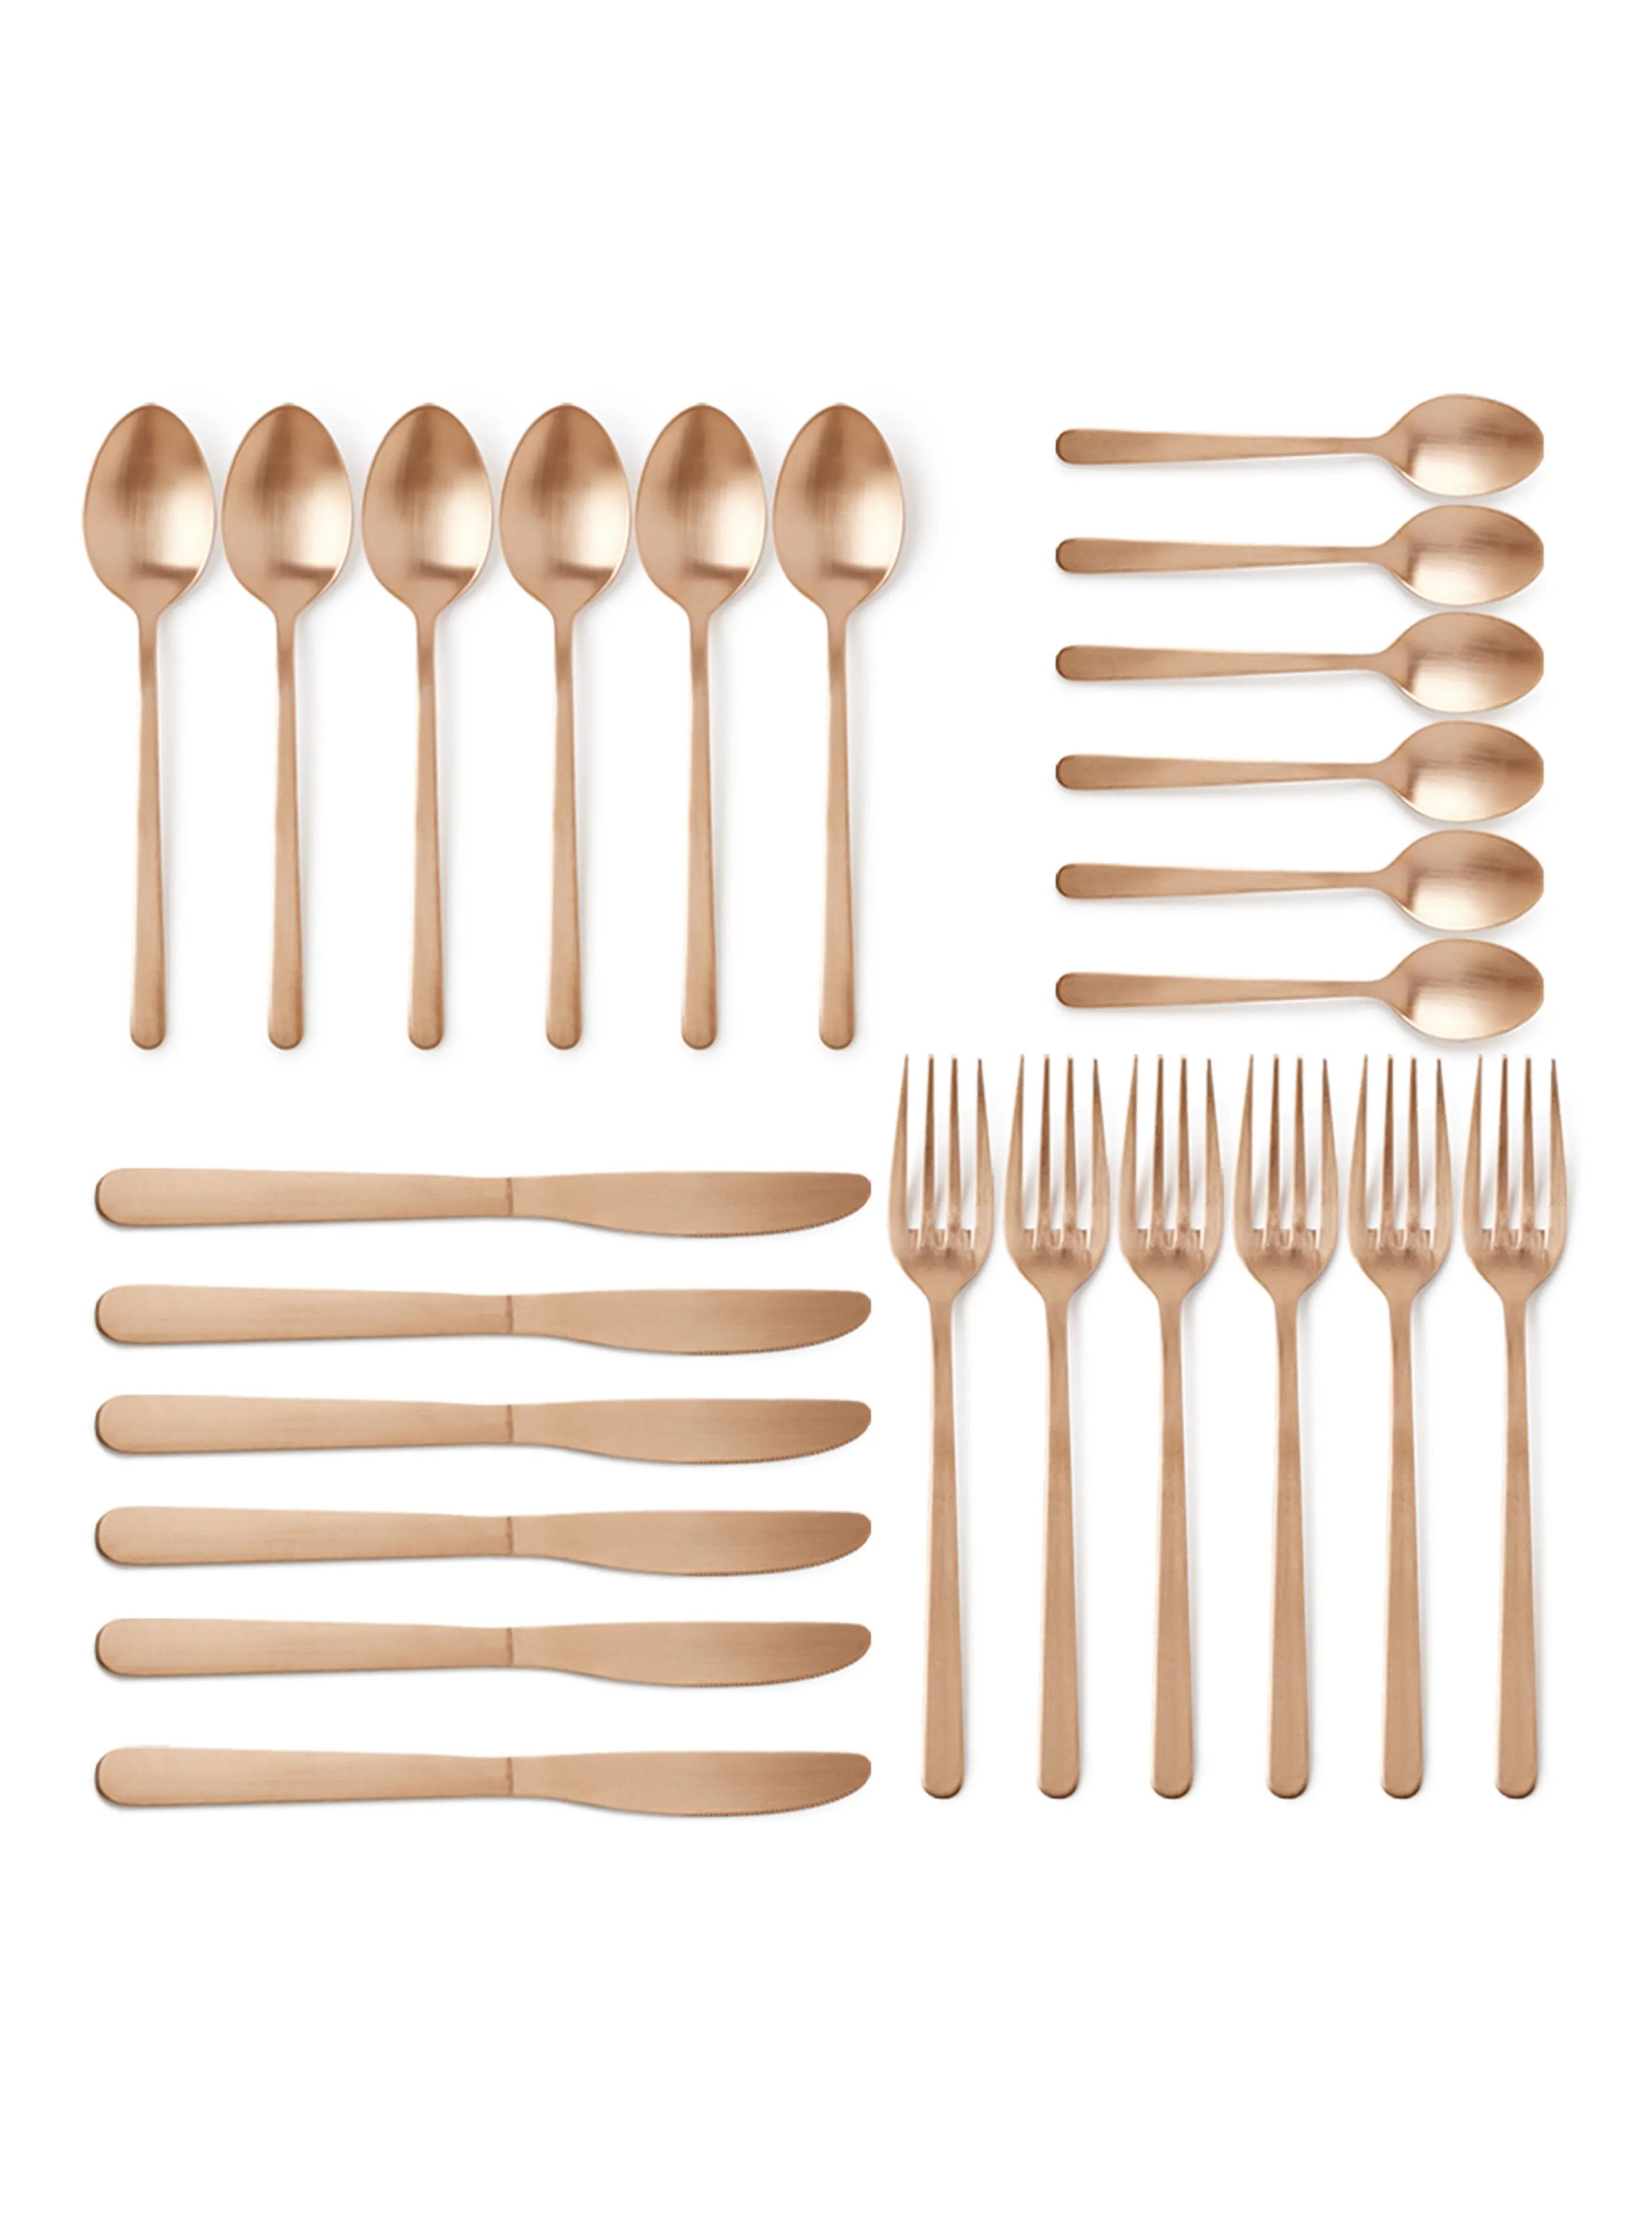 noon east 24 Piece Cutlery Set - Made Of Stainless Steel - Silverware Flatware - Spoons And Forks Set, Spoon Set - Table Spoons, Tea Spoons, Forks, Knives - Serves 6 - Design Copper Sail